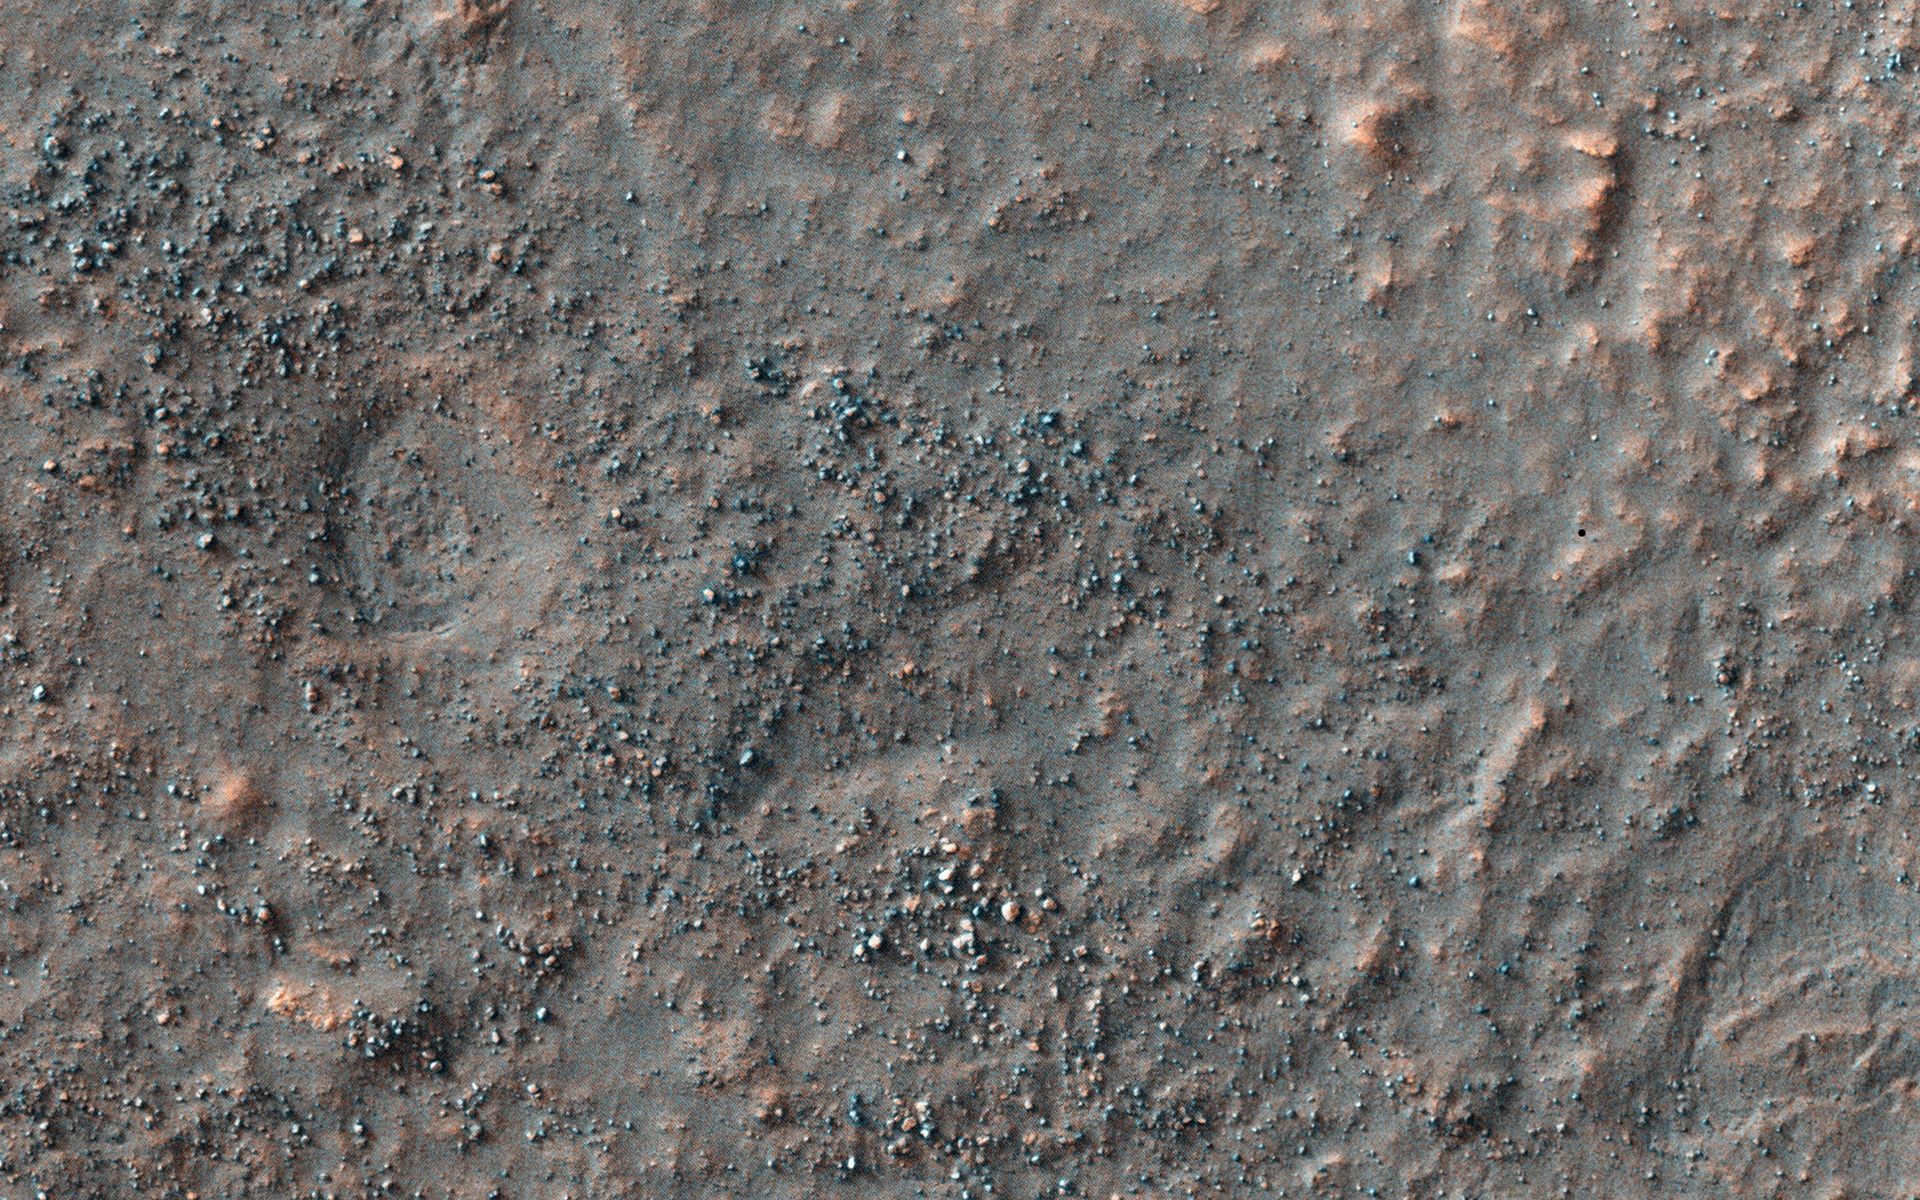 Space Image Search For The Mars Debris Field